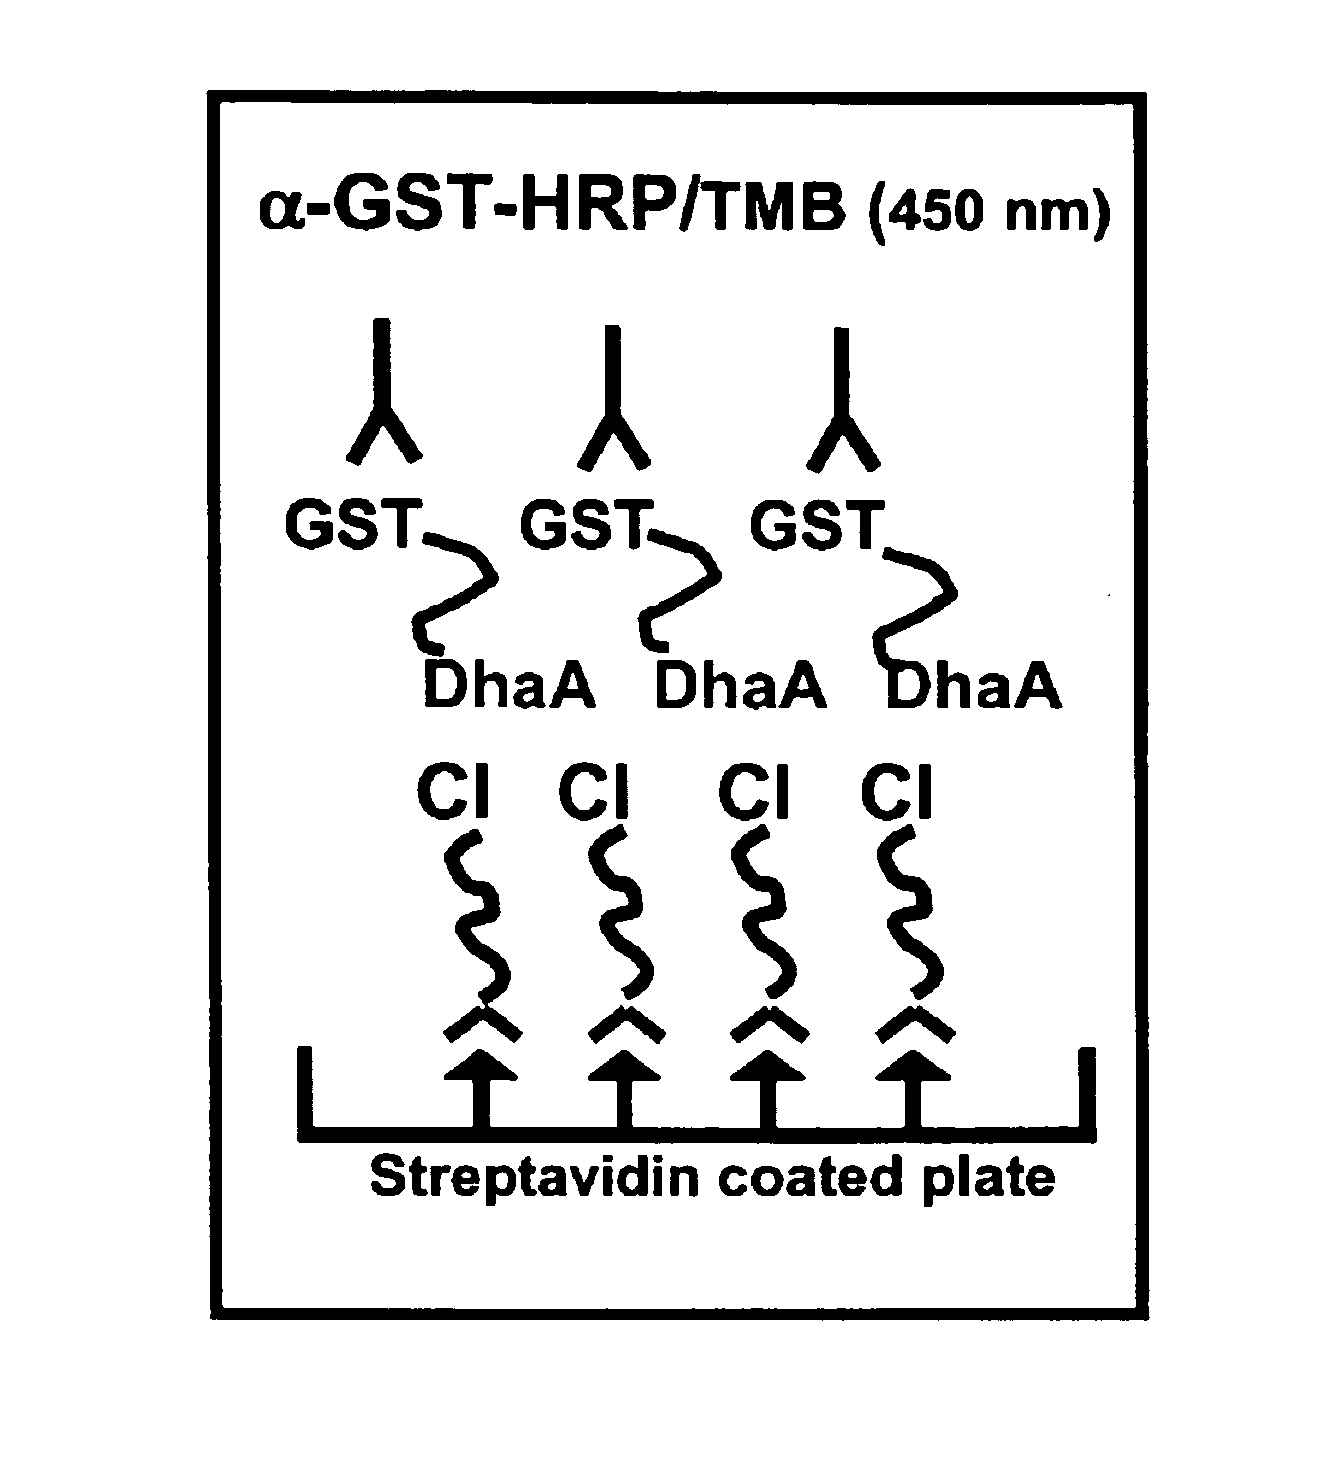 Method of immobilizing a protein or molecule via a mutant dehalogenase that is bound to an immobilized dehalogenase substrate and linked directly or indirectly to the protein or molecule